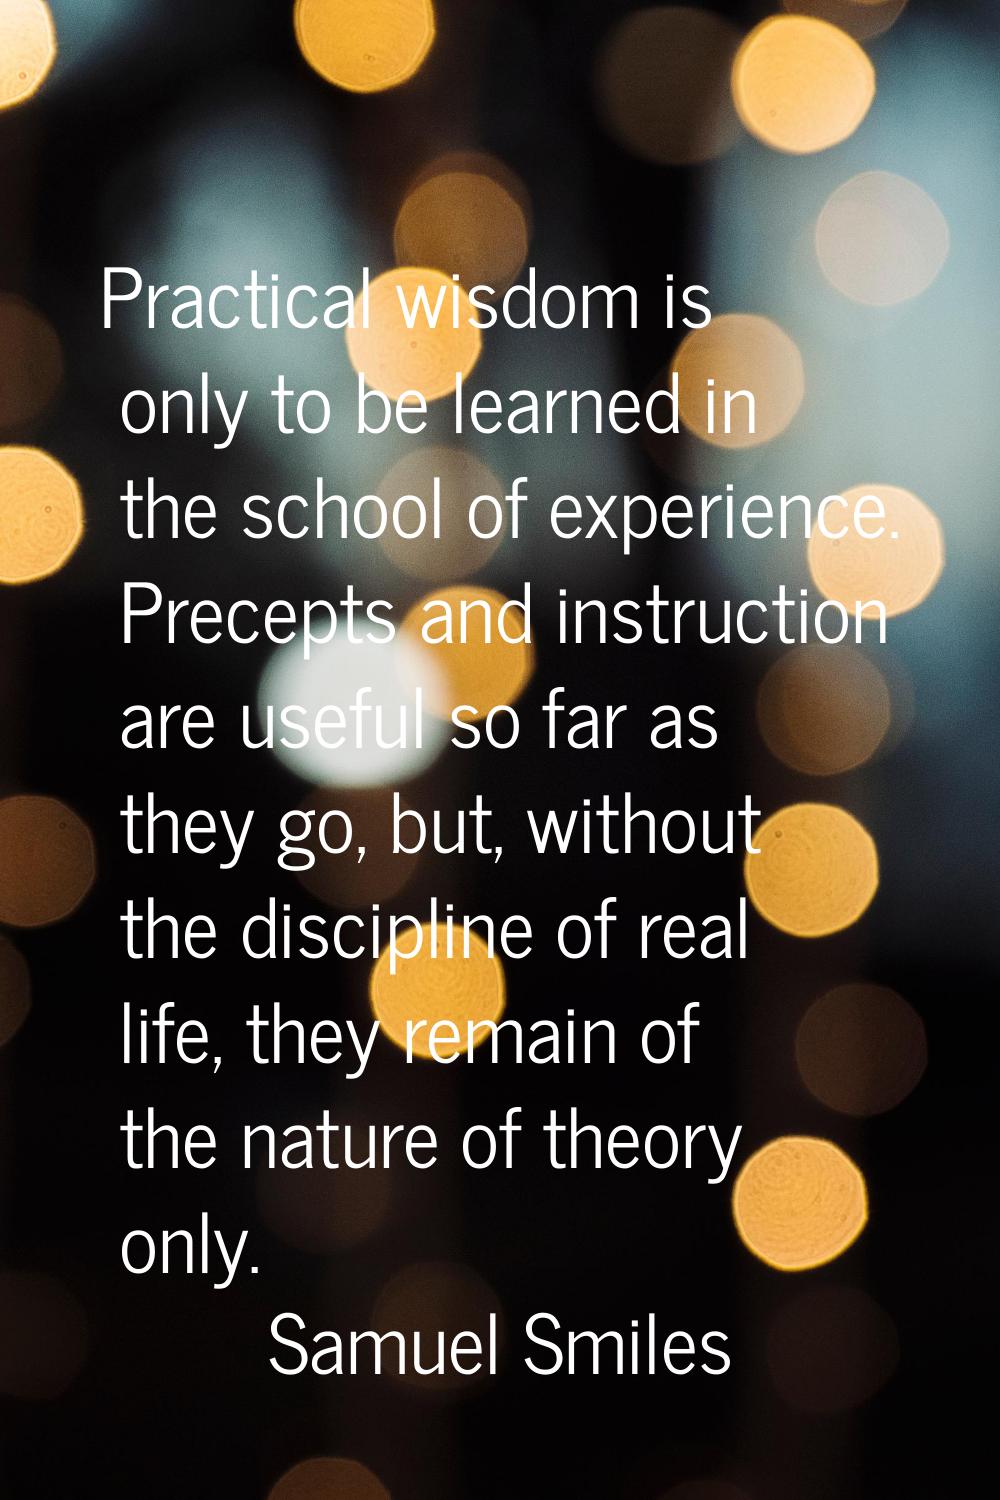 Practical wisdom is only to be learned in the school of experience. Precepts and instruction are us